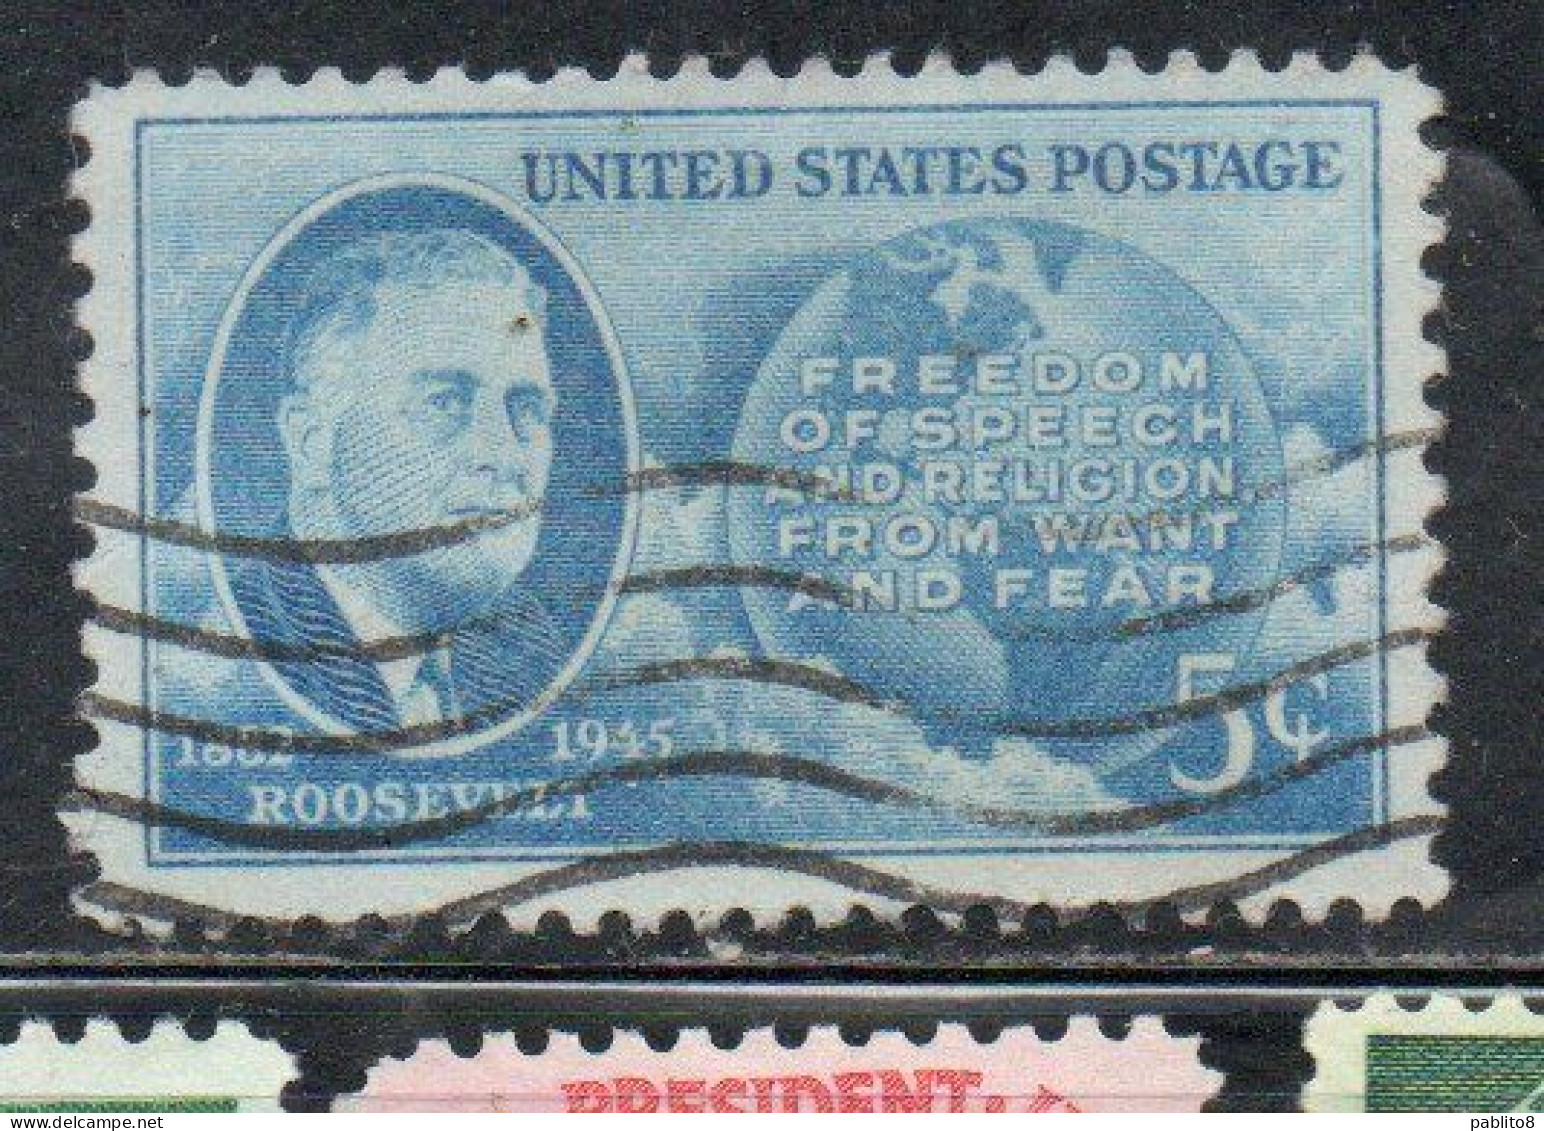 USA STATI UNITI 1945 FRANKLIN D. ROOSEVELT ISSUE GLOBE AND FOUR FREEDOMS CENT. 5c USED USATO OBLITERE' - Gebraucht